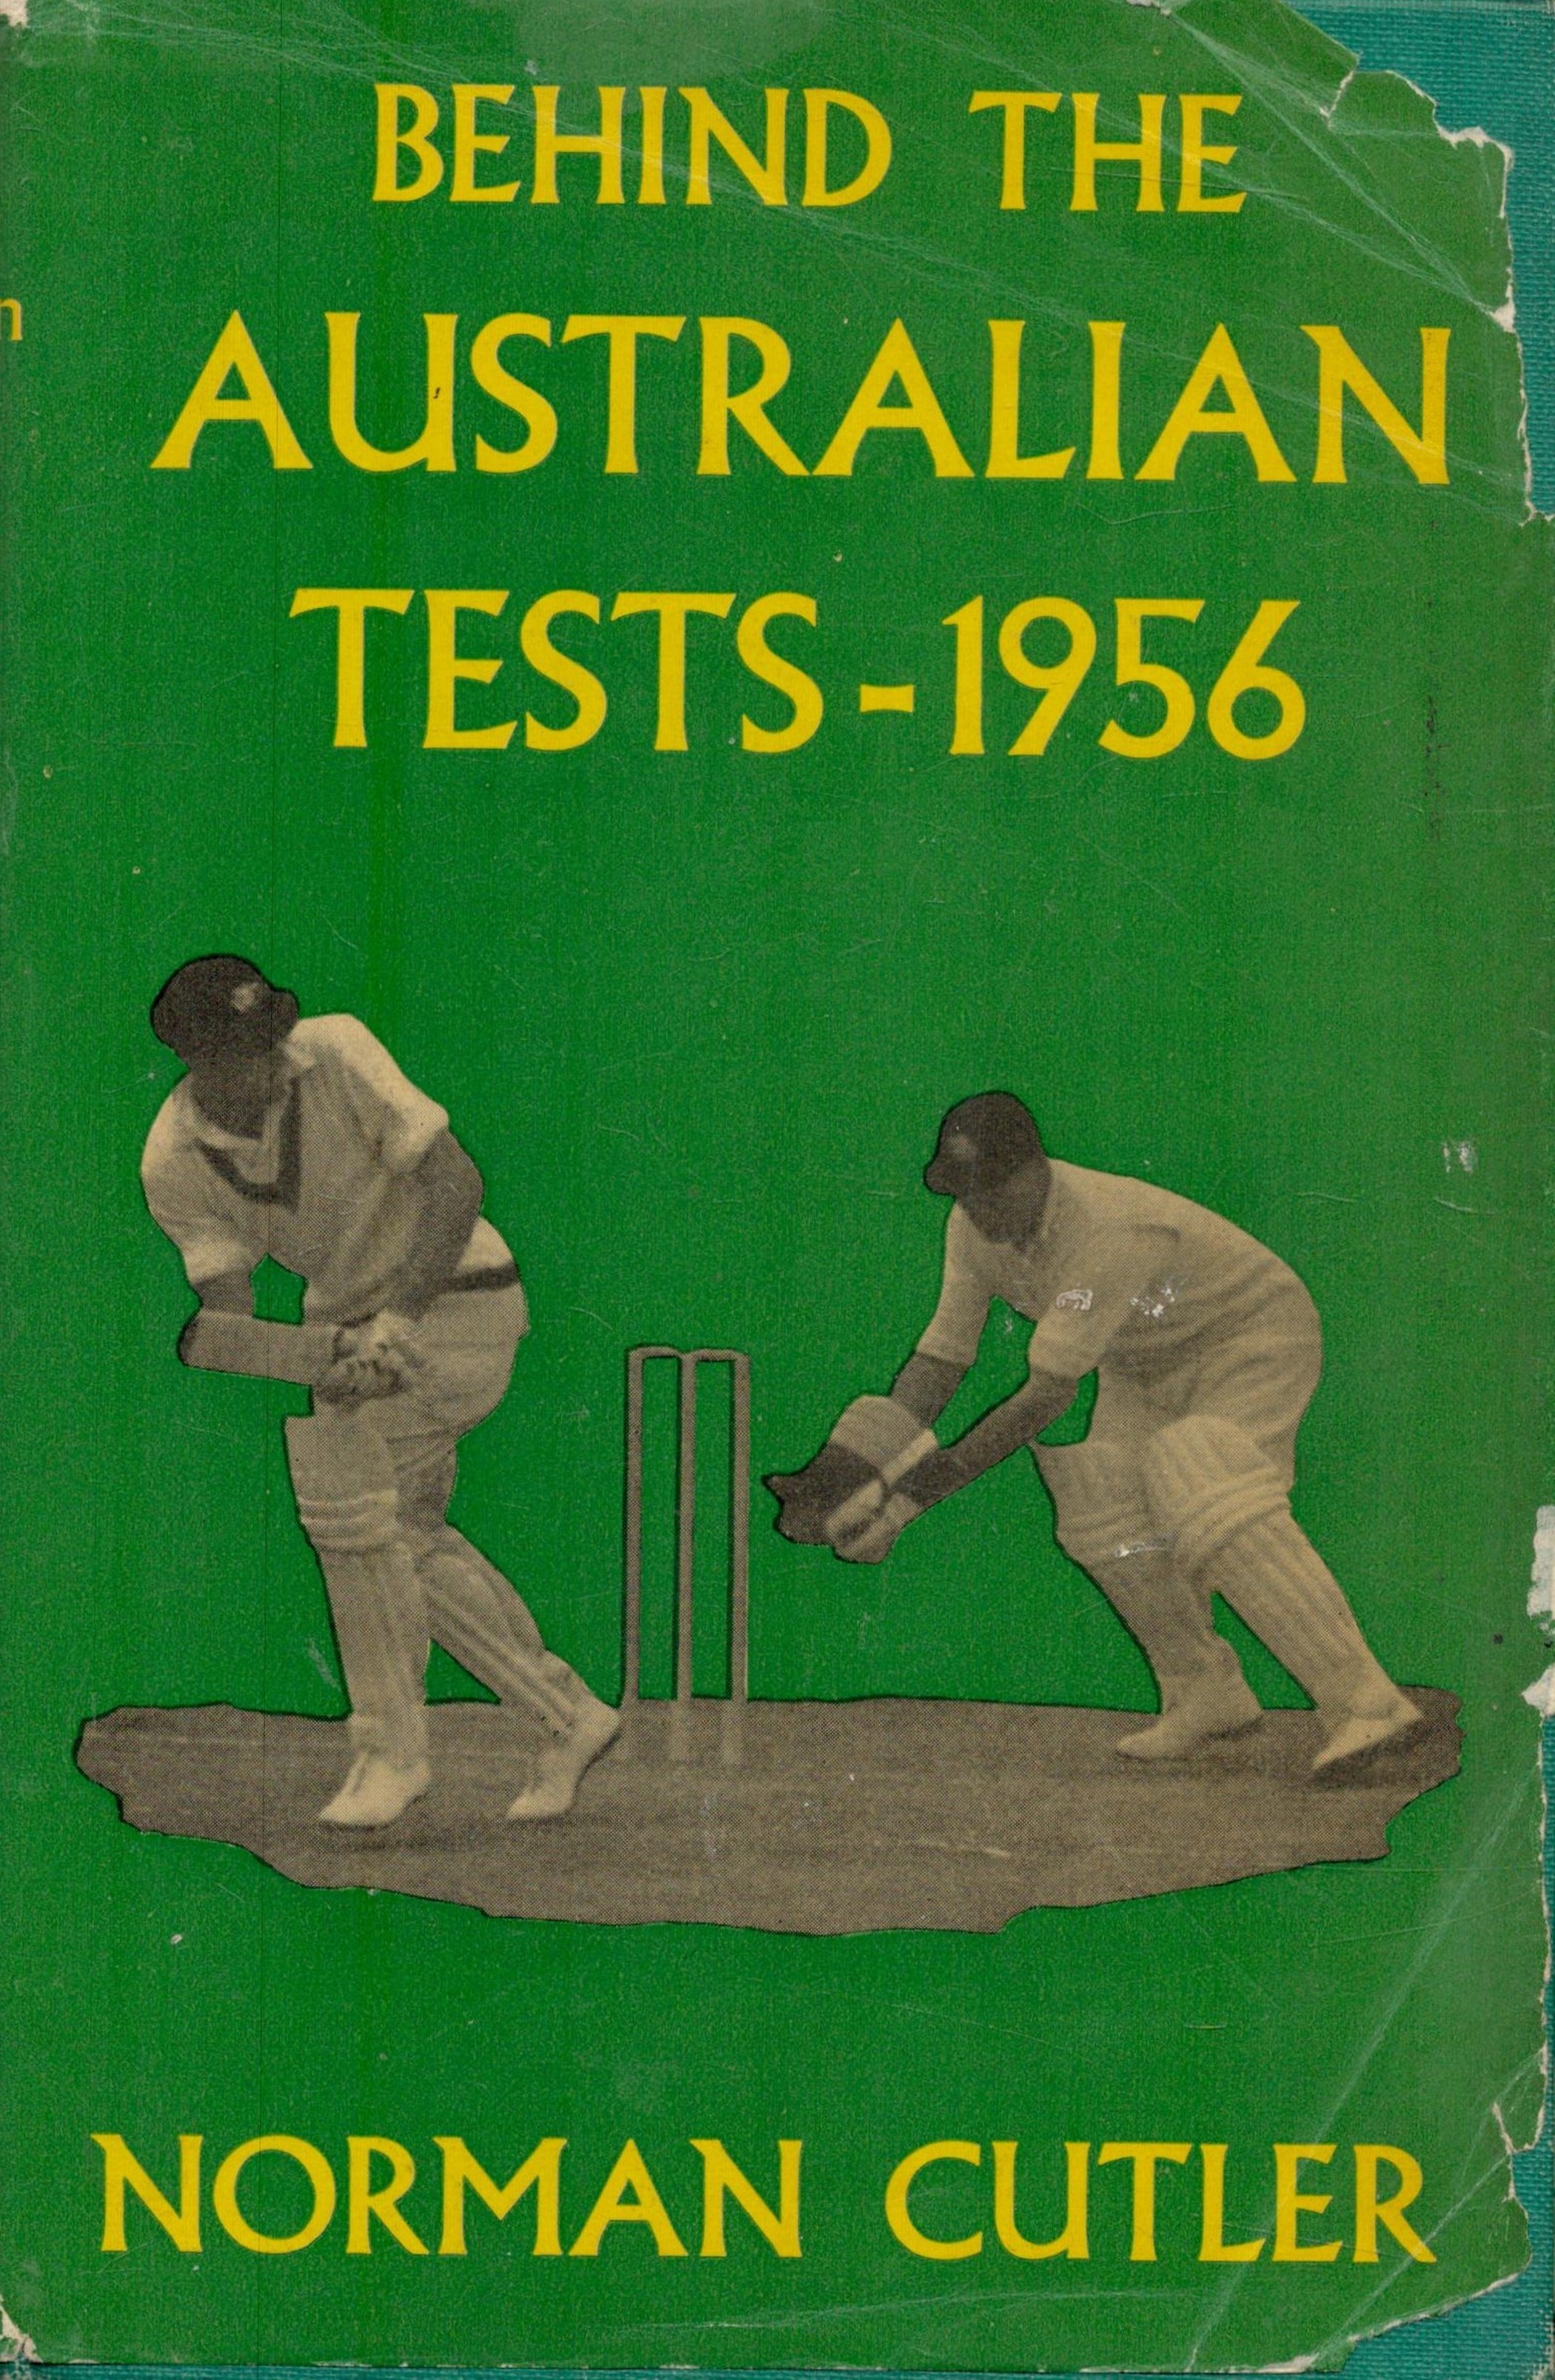 Behind the Australian tests 1956 by Norman Cutler hardback book. Some damage to dustjacket.